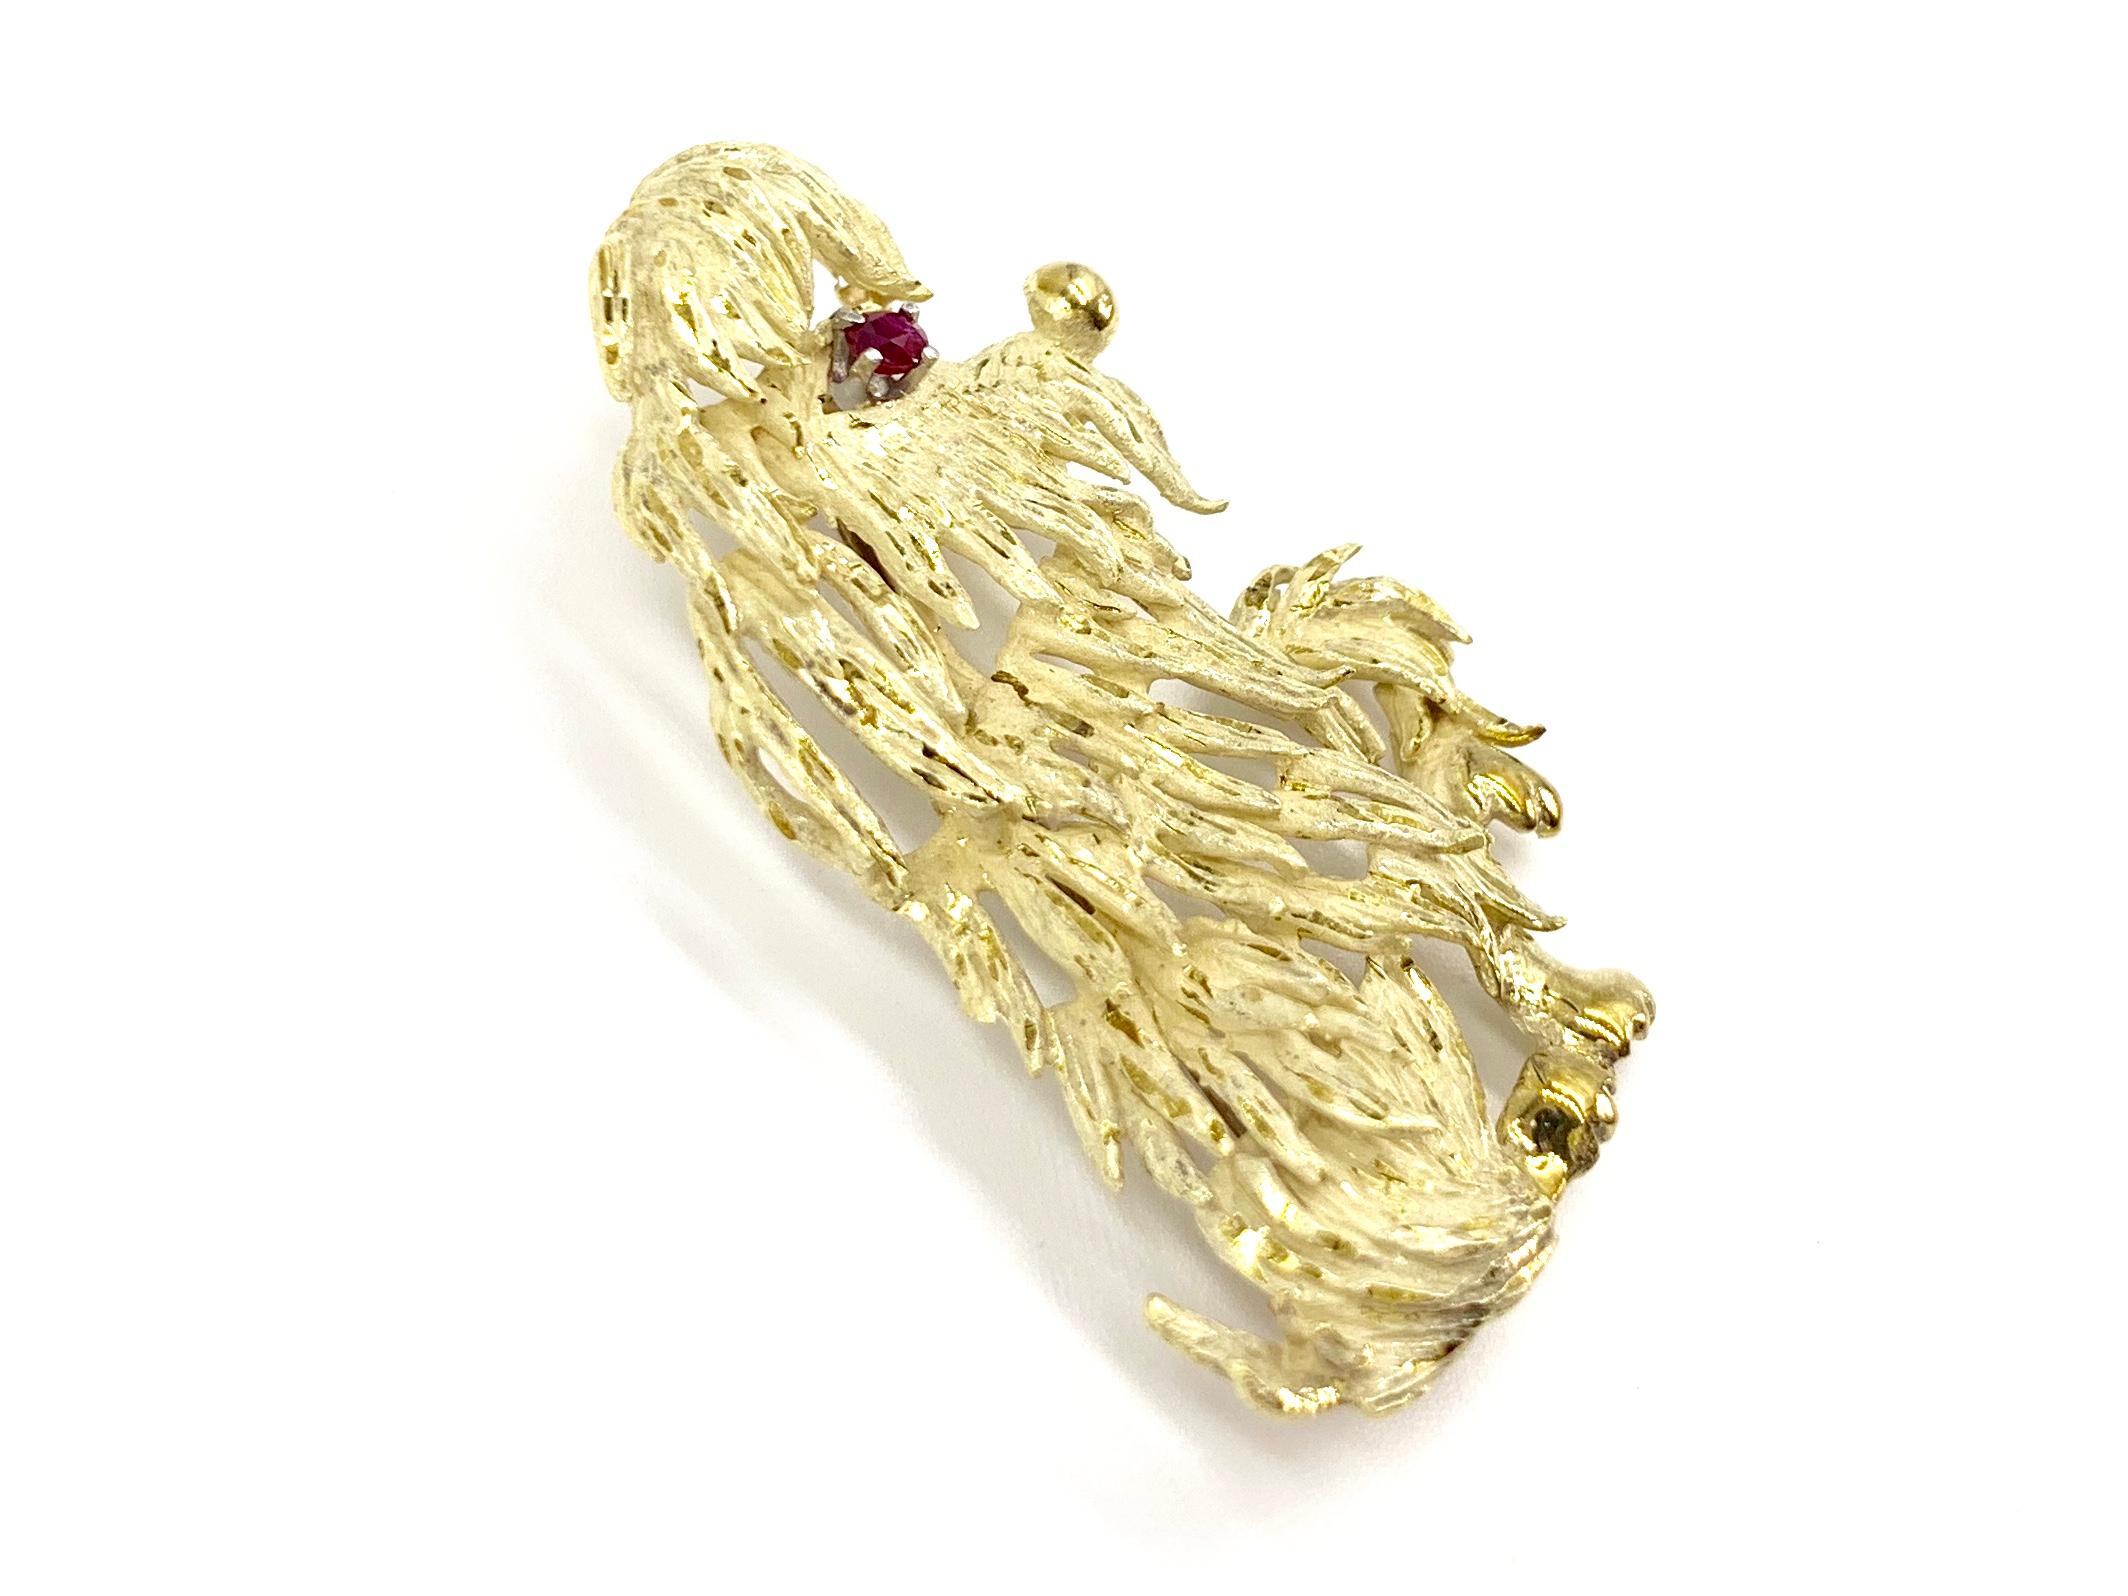 Yellow Gold and Ruby Shaggy Dog Brooch, circa 1960s (Rundschliff)